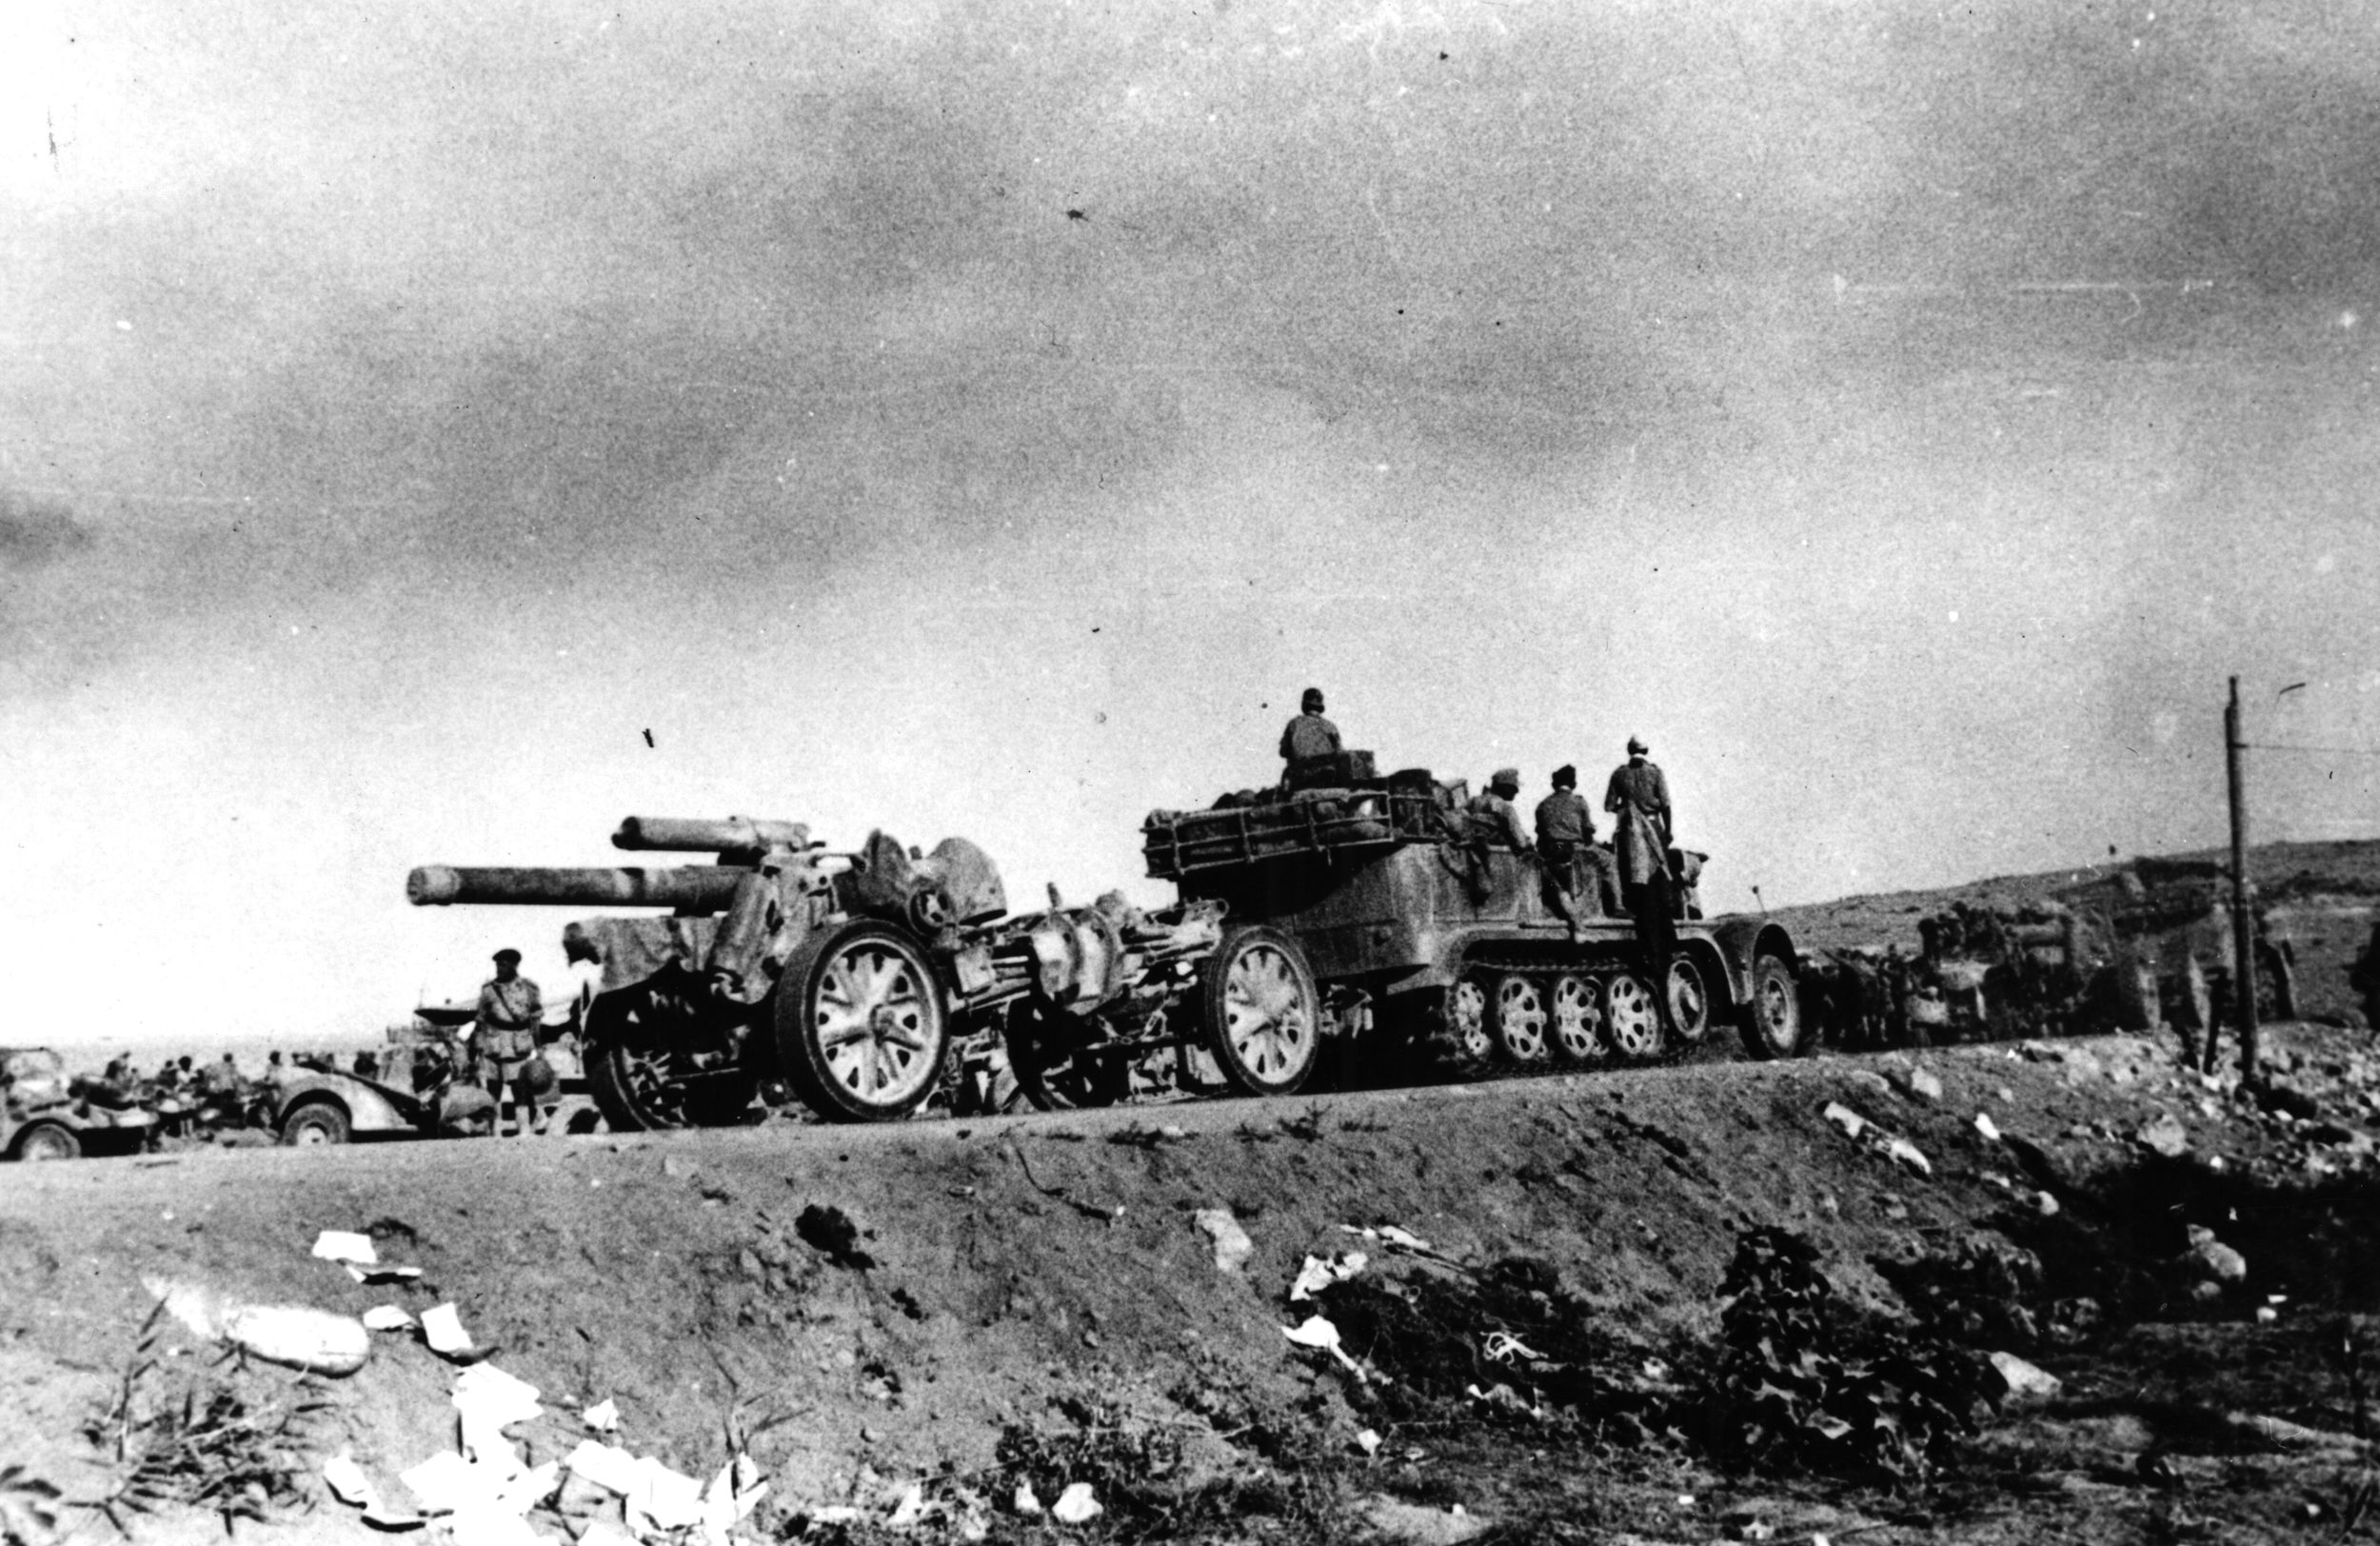 Its carriage towed by a half-track, a heavy German artillery weapon is moved into position during the first phase of the fighting at El Alamein.